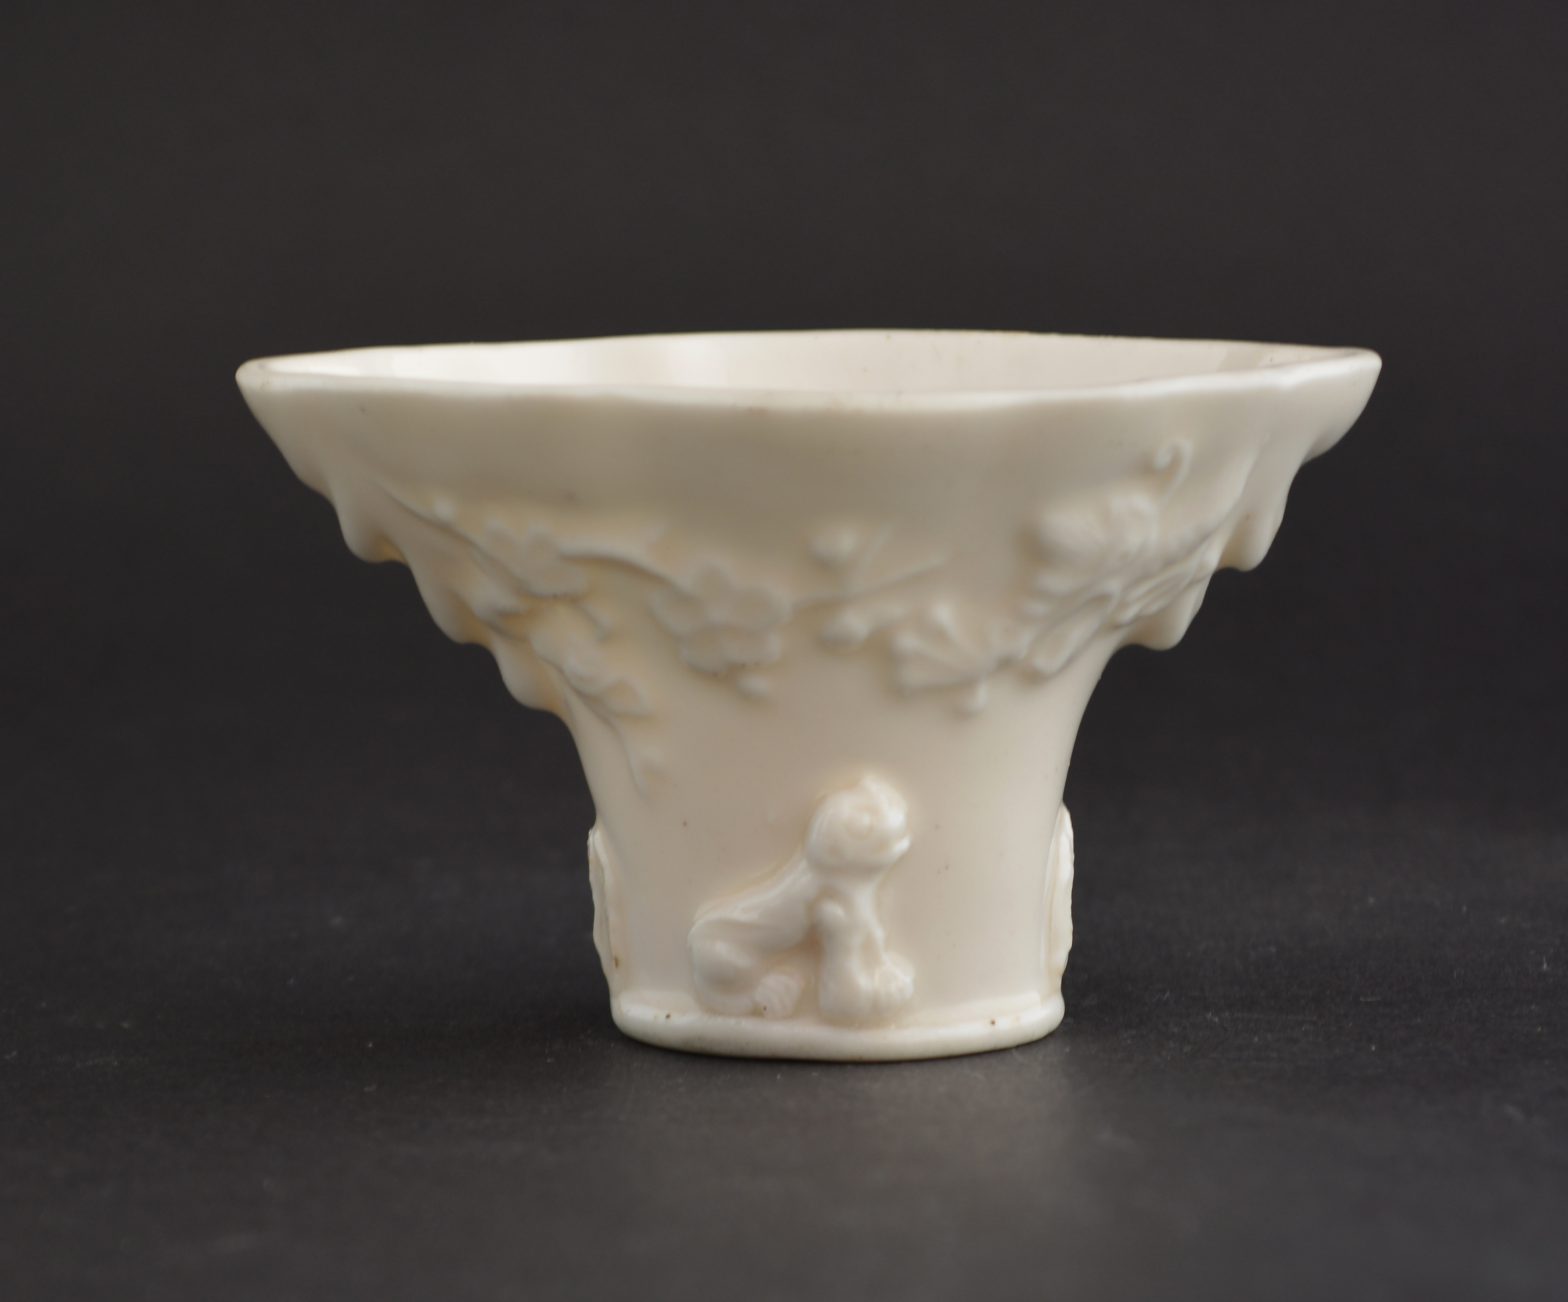 A 17th Century Blanc de Chine `Libation Cup`, Shunzhi or Kangxi Period c.1640-1700, Dehua Kilns Fujian Province. On One Side with Moulded Decoration Depicting a Dragon Emerging from Clouds and a Tiger (Applied) on the Ground Beneath a Flowering Plum (Prunus) Tree. The Other Side with a Crane Flying Above a Spotted Deer (Applied) with a Pine Tree. The Applied Decoration is Crisp and the Branch of the Tree has Been Applied so there is a Part of it that is Separate from the Body of the Cup.